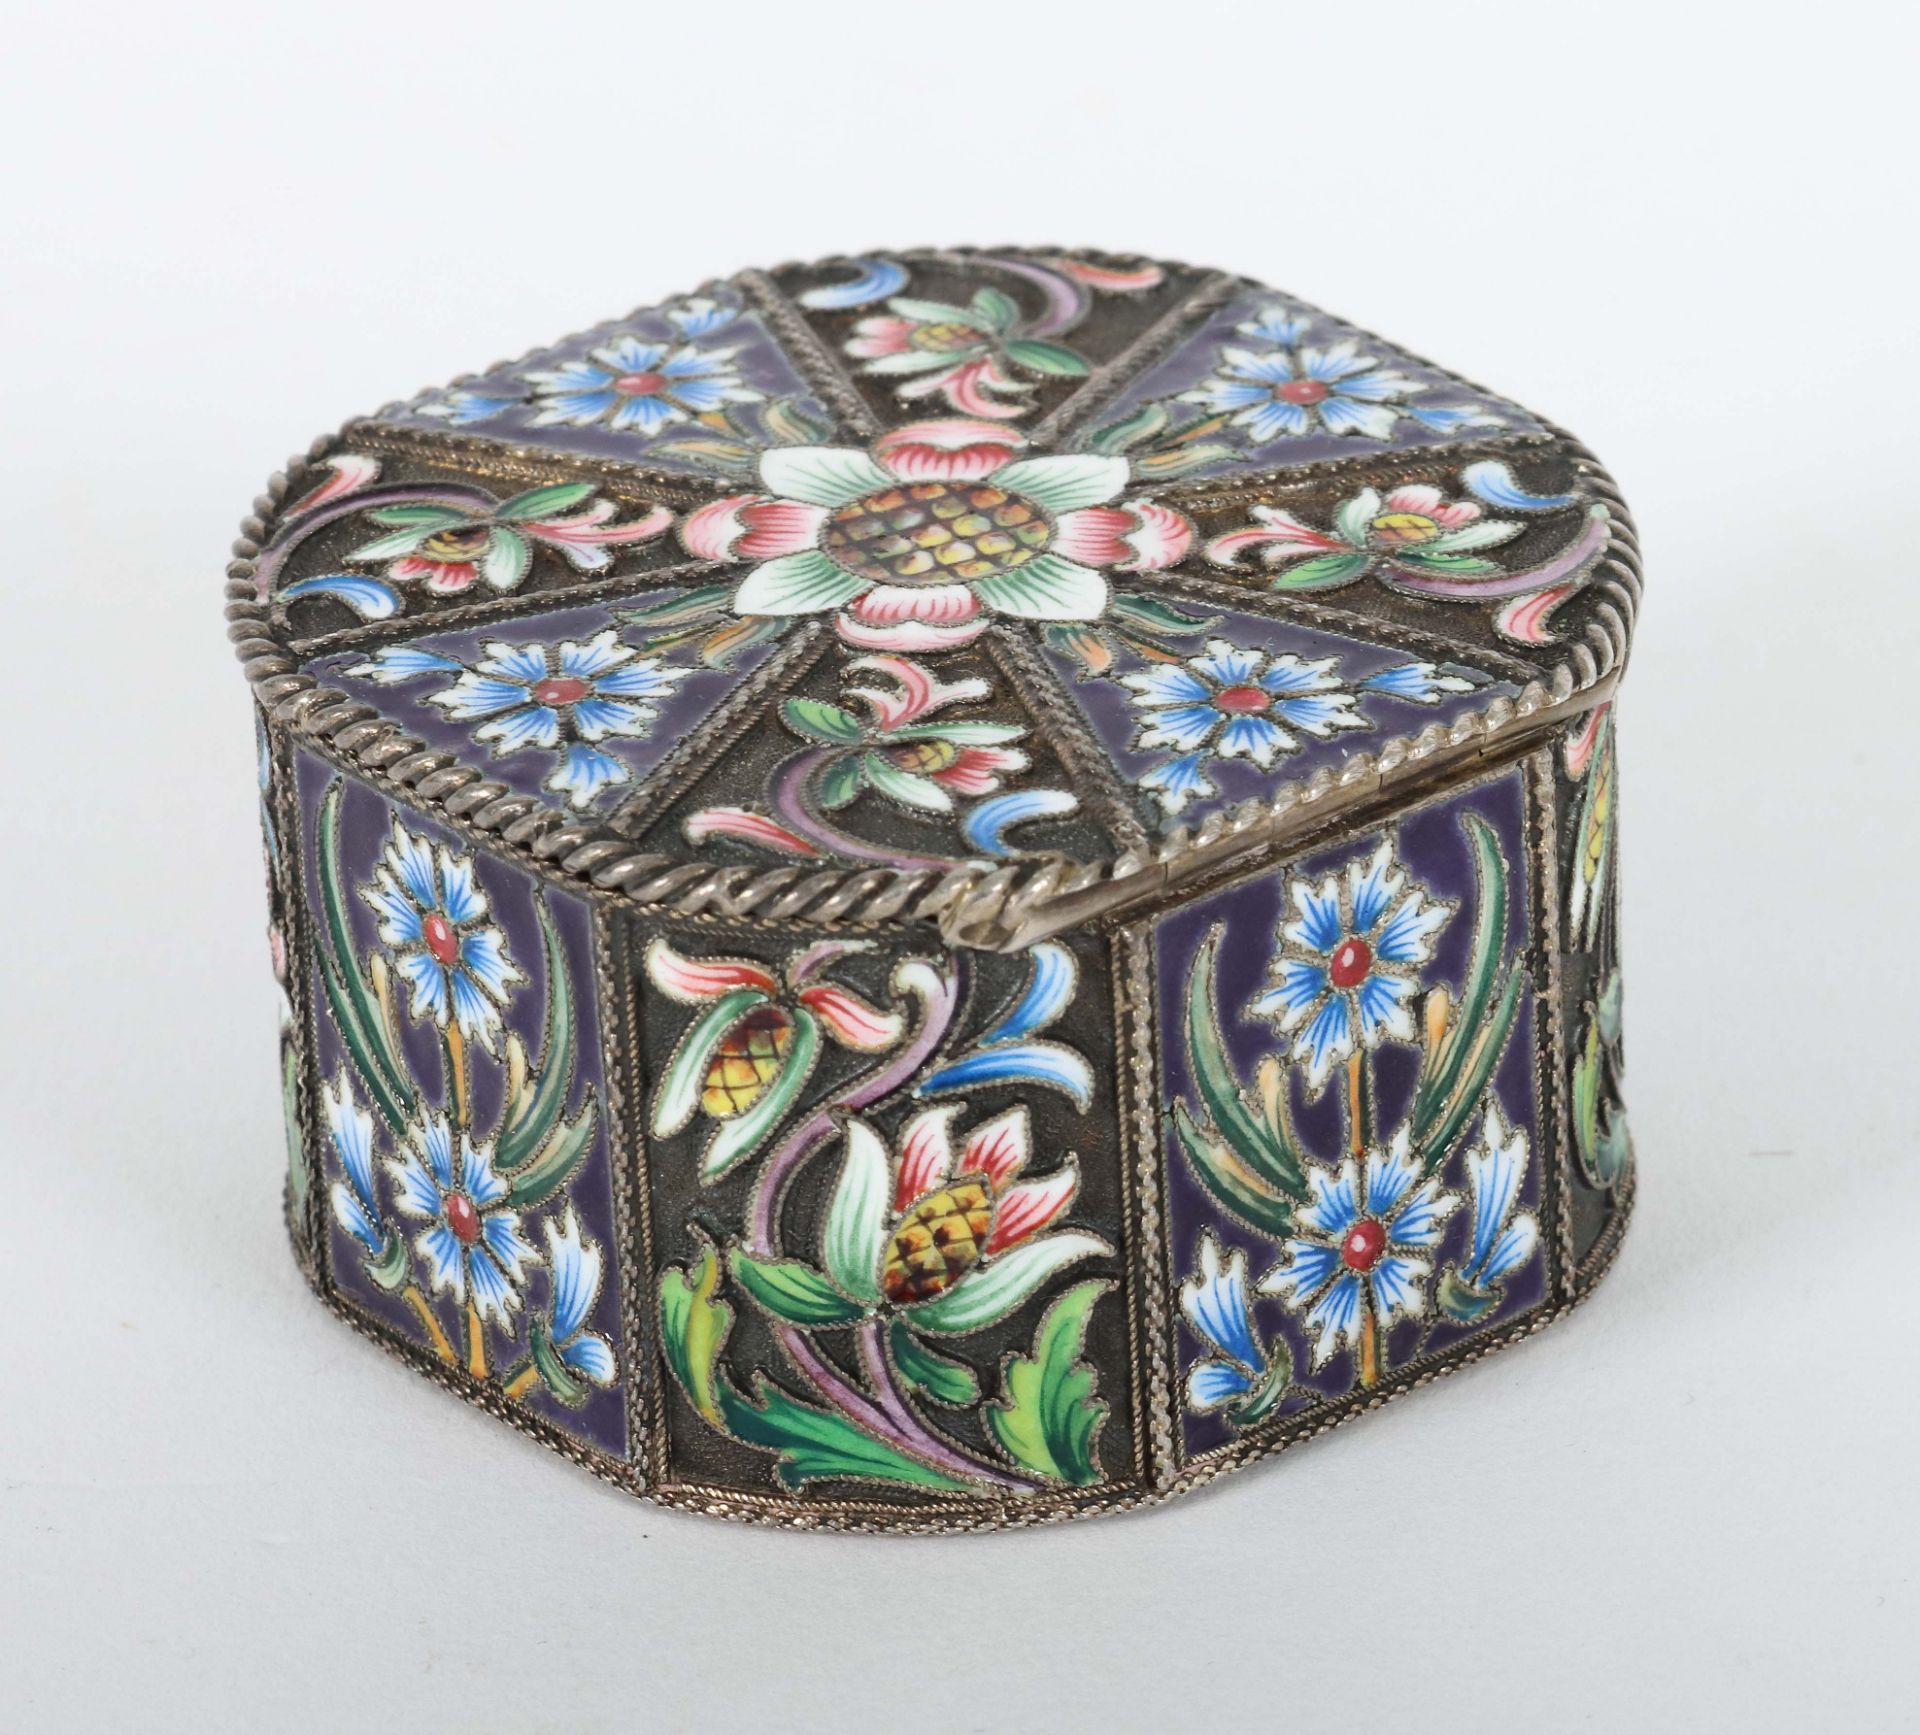 Cloisonné-Emaille-Deckeldose wohl - Image 3 of 6